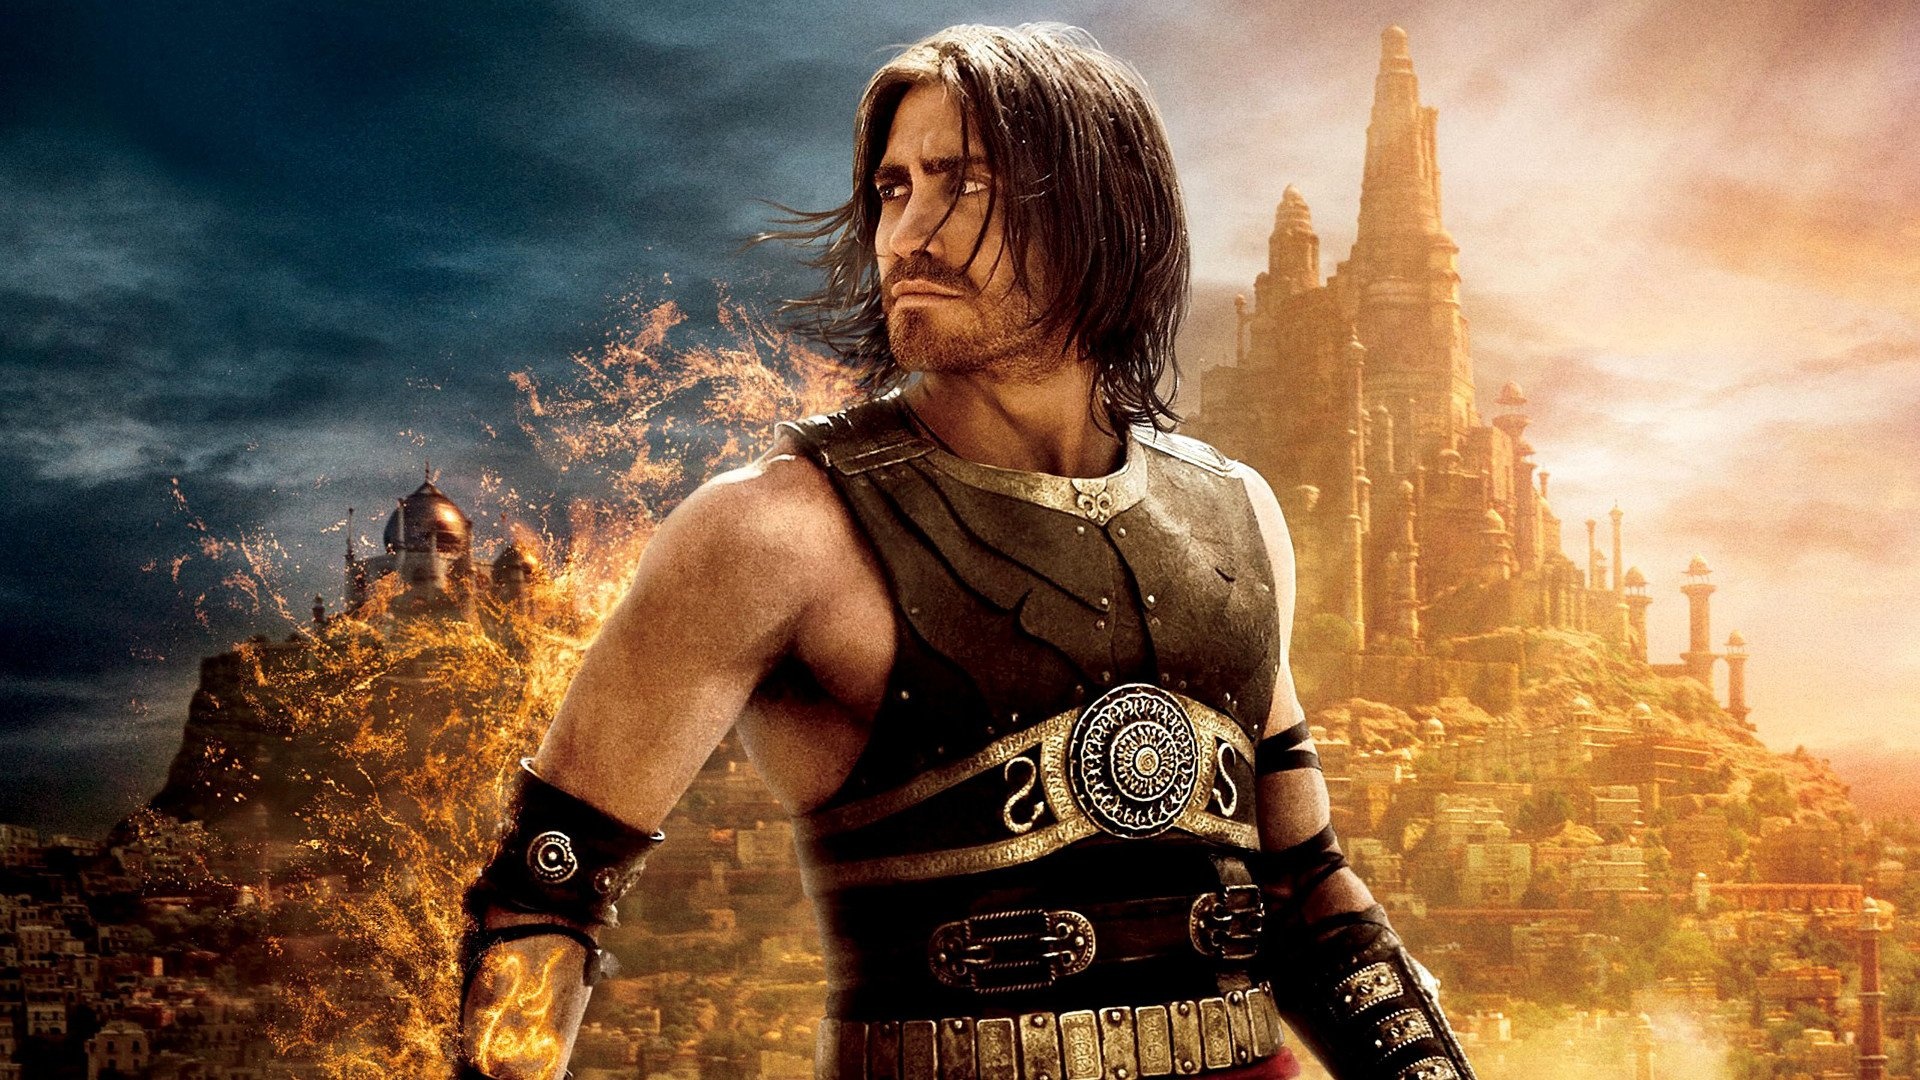 Prince of Persia (Movie): Jake Gyllenhaal, The adopted brother of Garsiv and Tus. 1920x1080 Full HD Wallpaper.